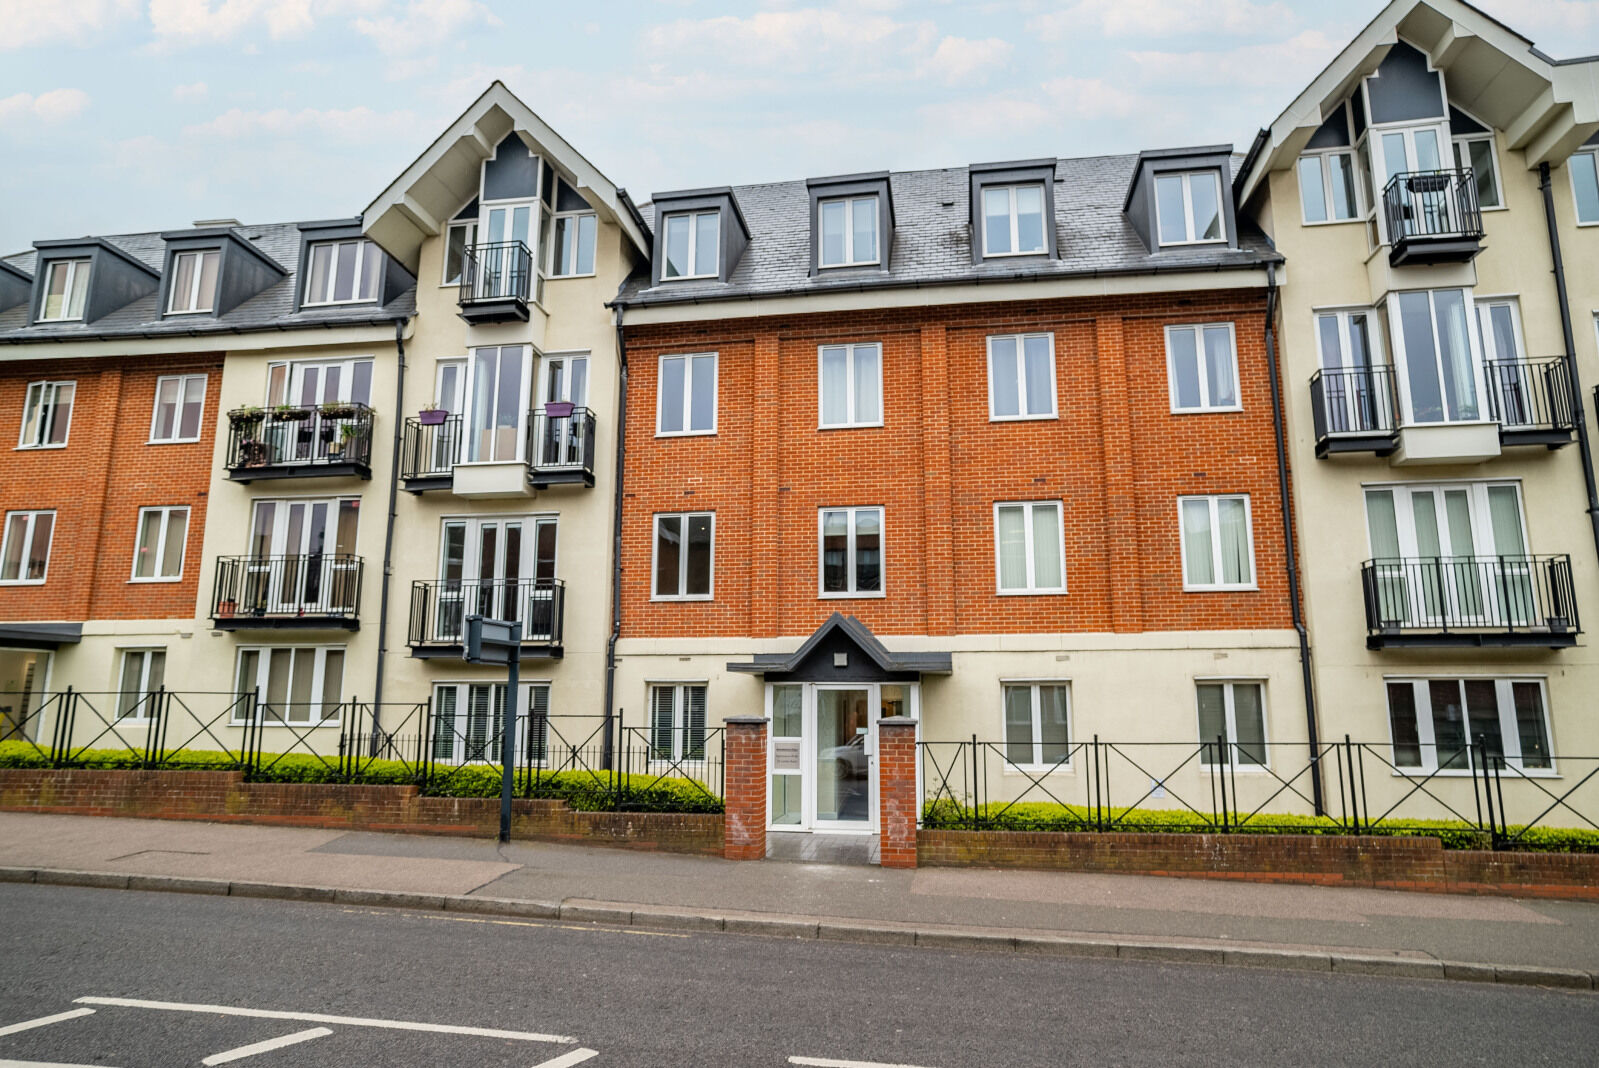 2 bedroom  flat to rent, Available now London Road, St. Albans, AL1, main image